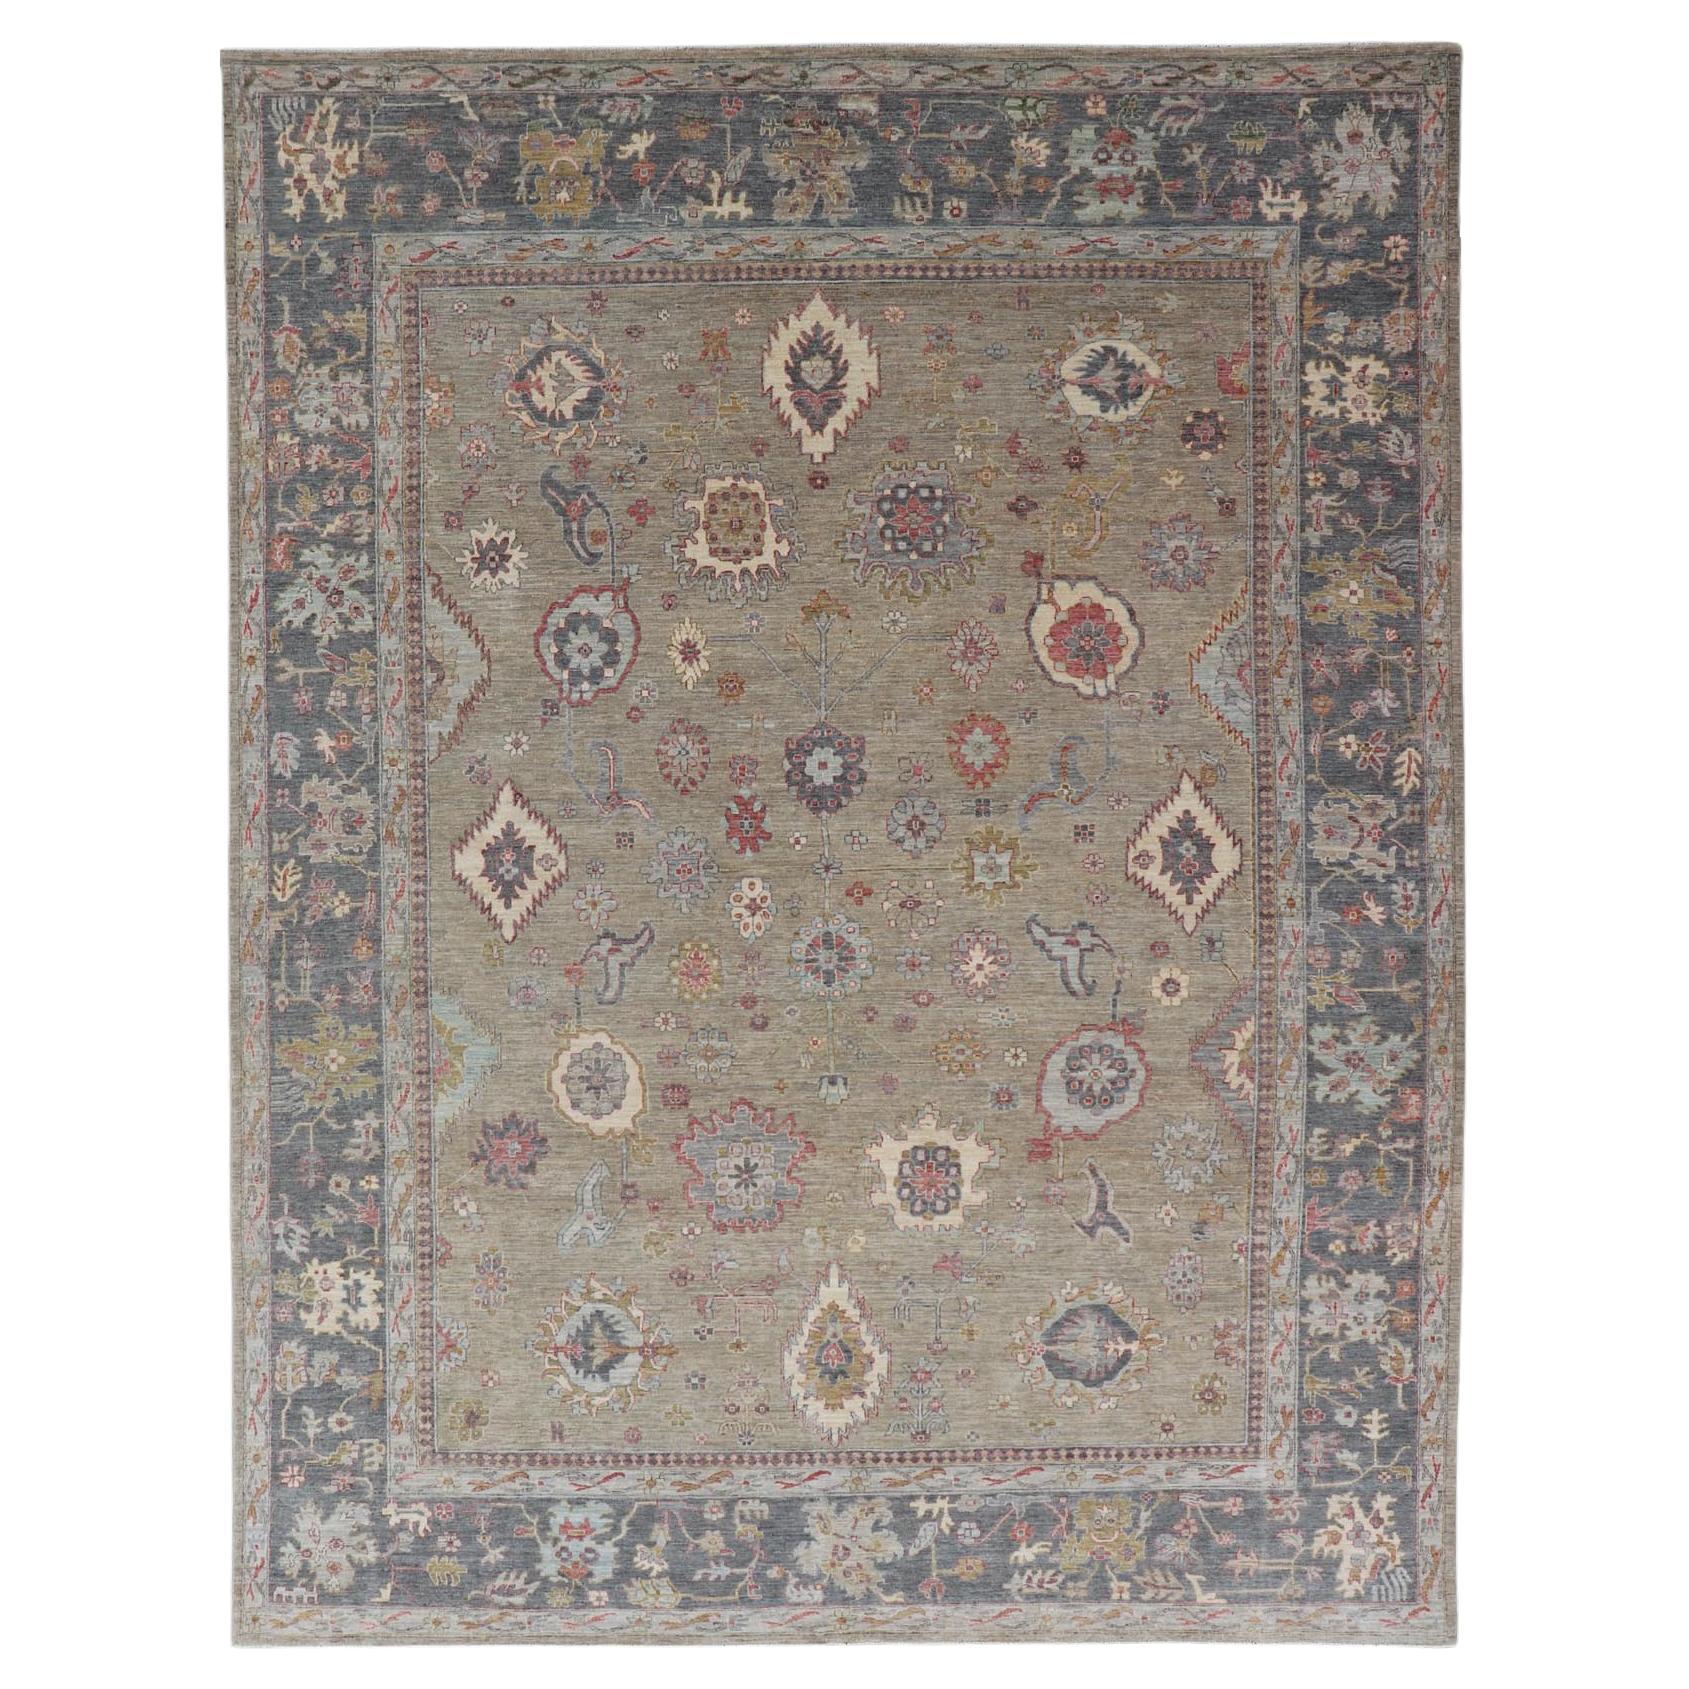 Large All-Over Designed Tabriz with A Yellow-Taupe Background and Muted Colors